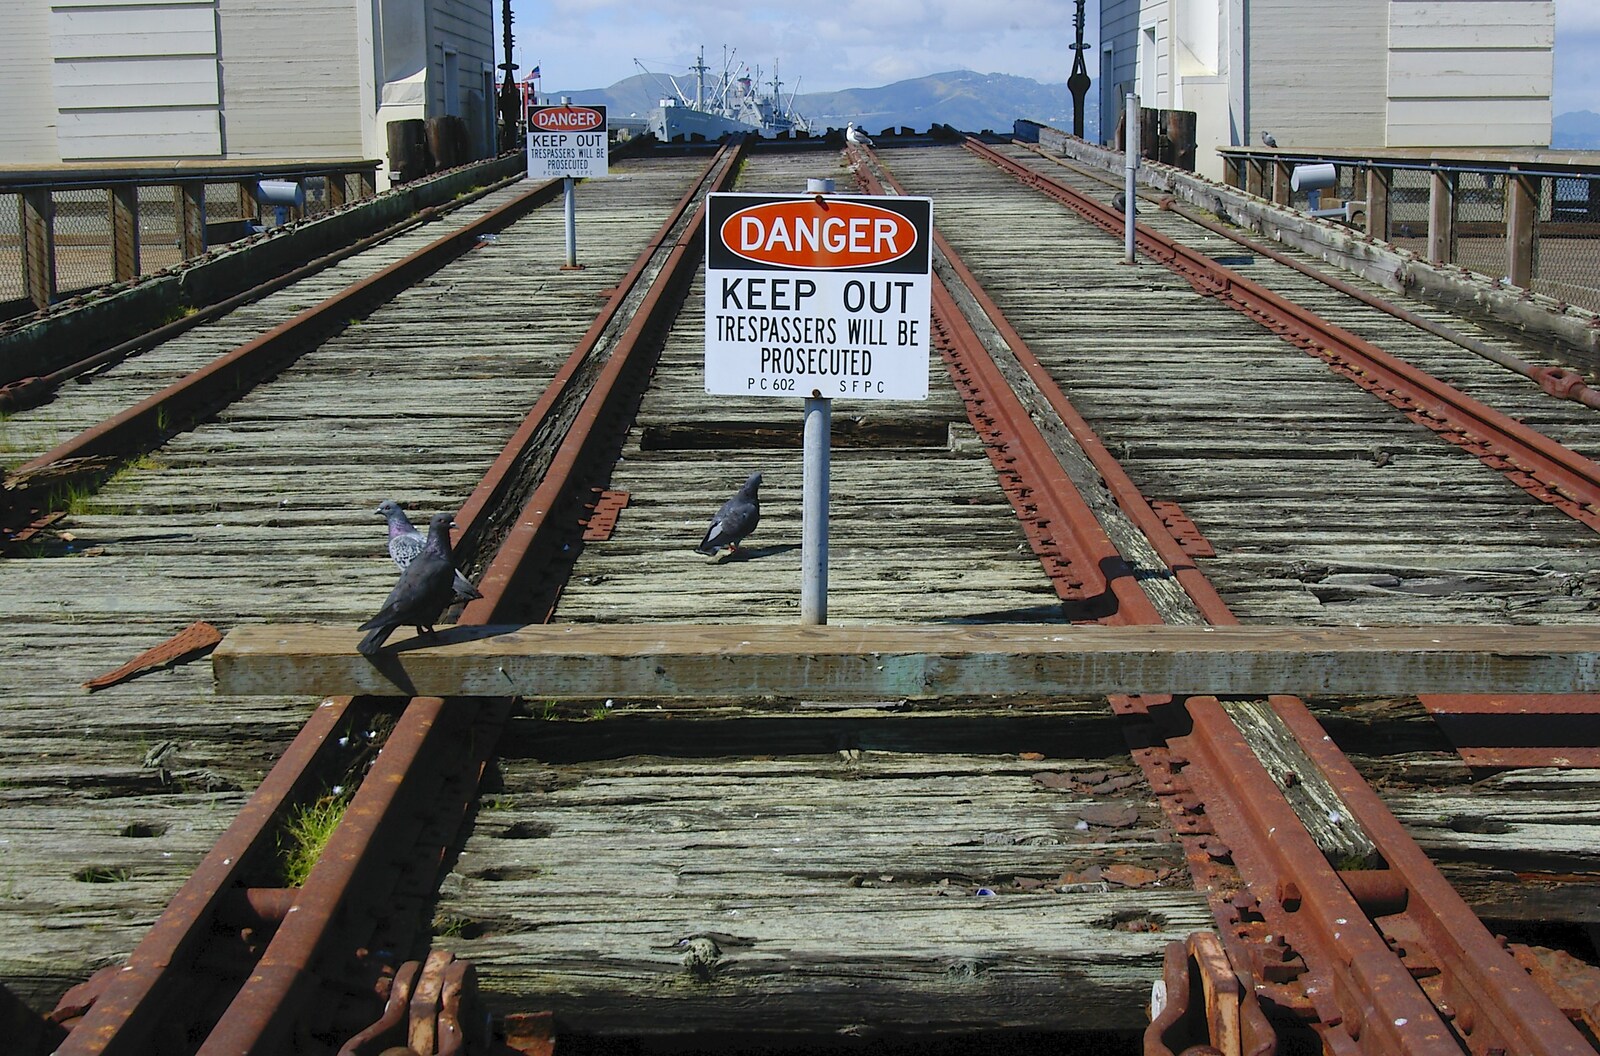 Rails to nowhere from Chinatown, Telegraph Hill and Fisherman's Wharf, San Francisco, California, US - 11th March 2006